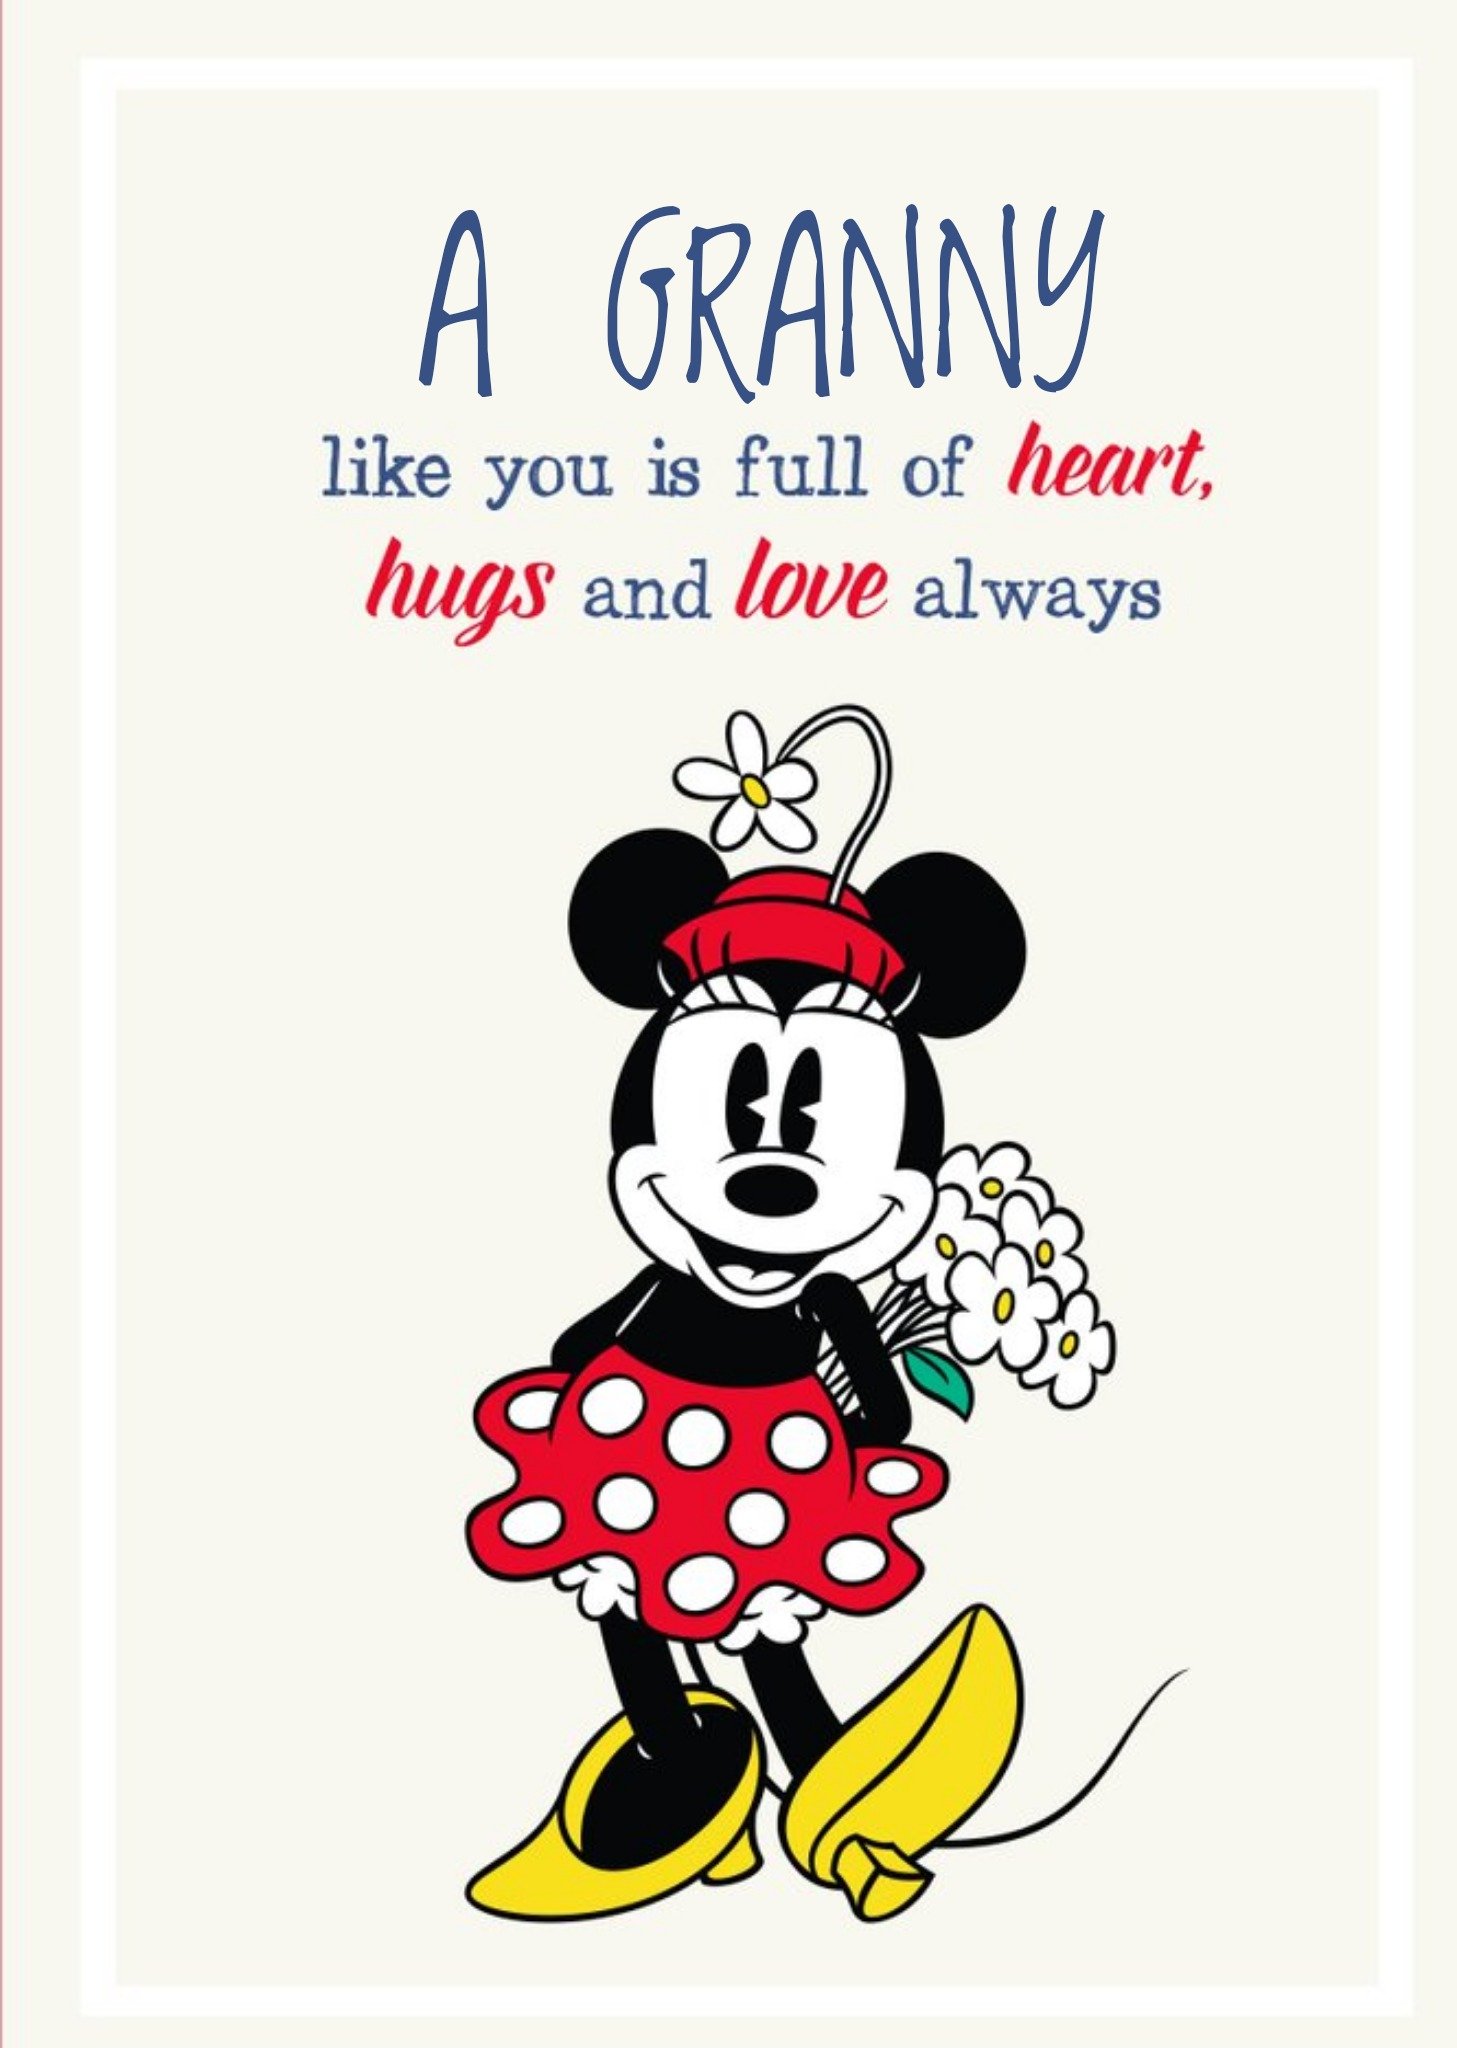 Disney Cute Minnie Mother's Day Card - Full Of Heart, Hugs And Love Always - Granny Ecard